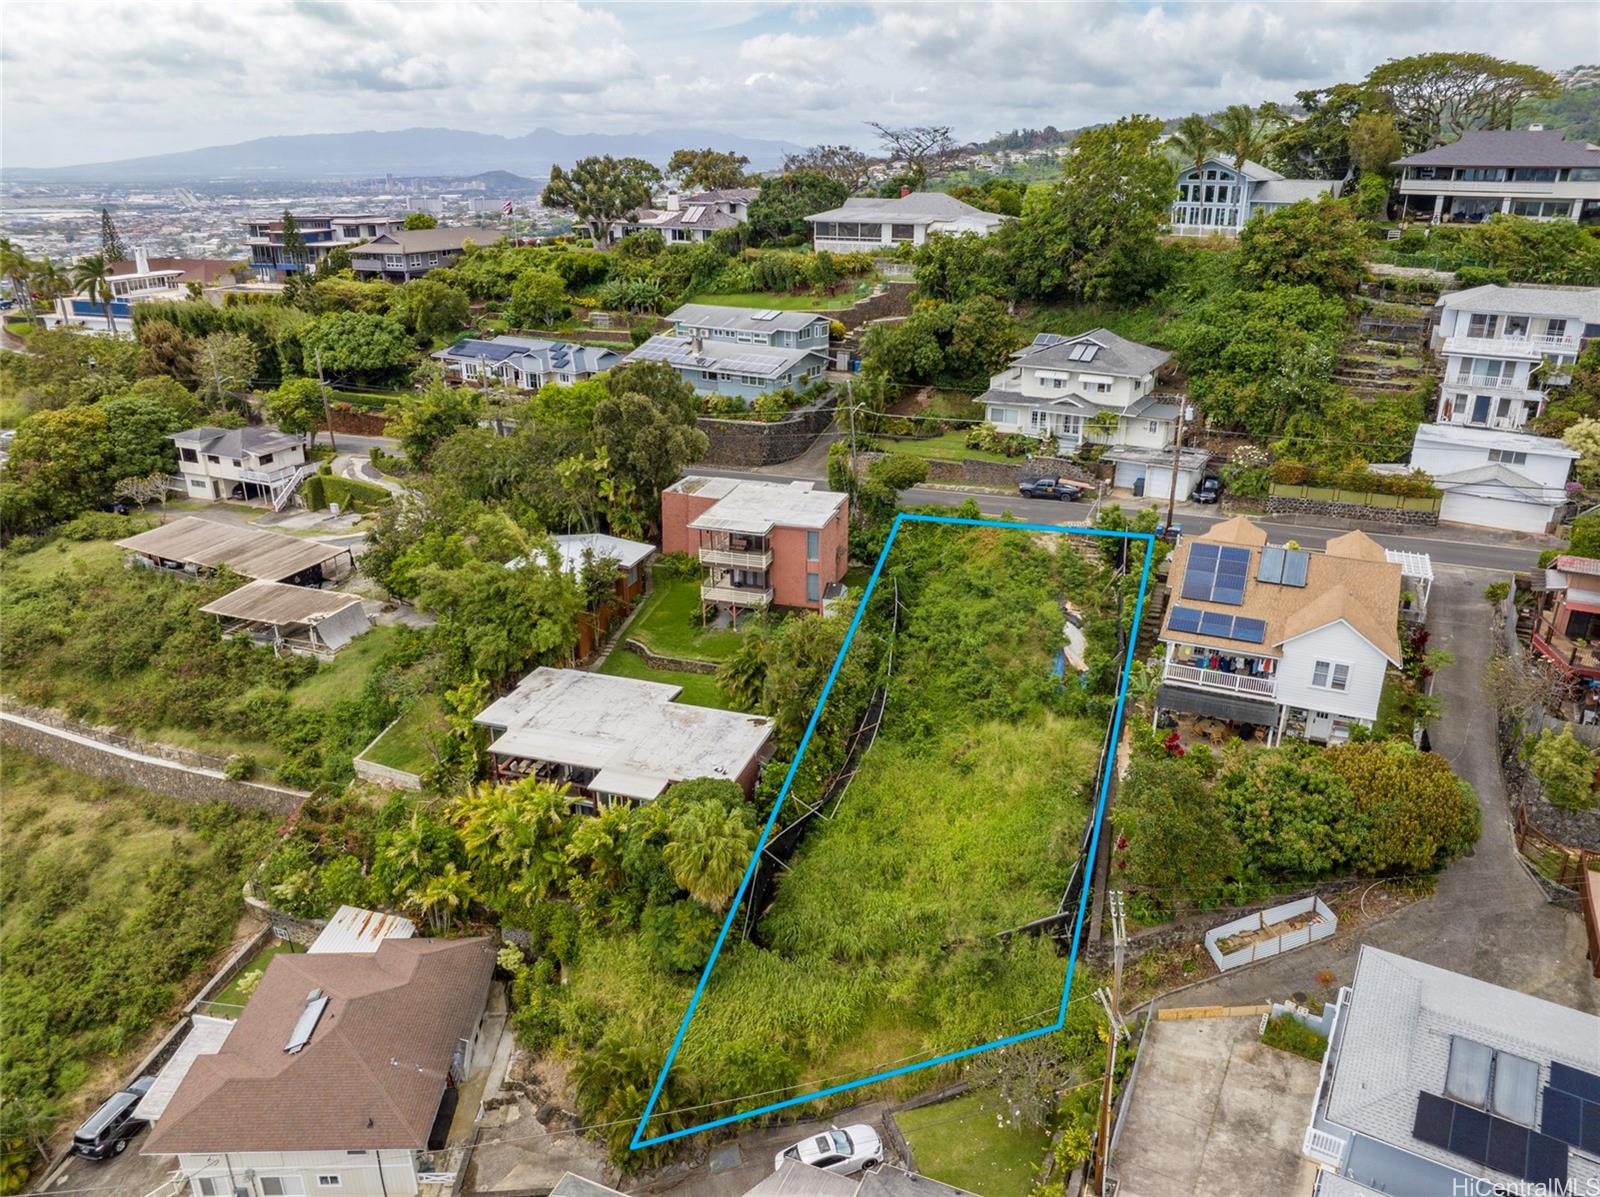 2761 Pacific Hts Road  Honolulu, Hi vacant land for sale - photo 6 of 7